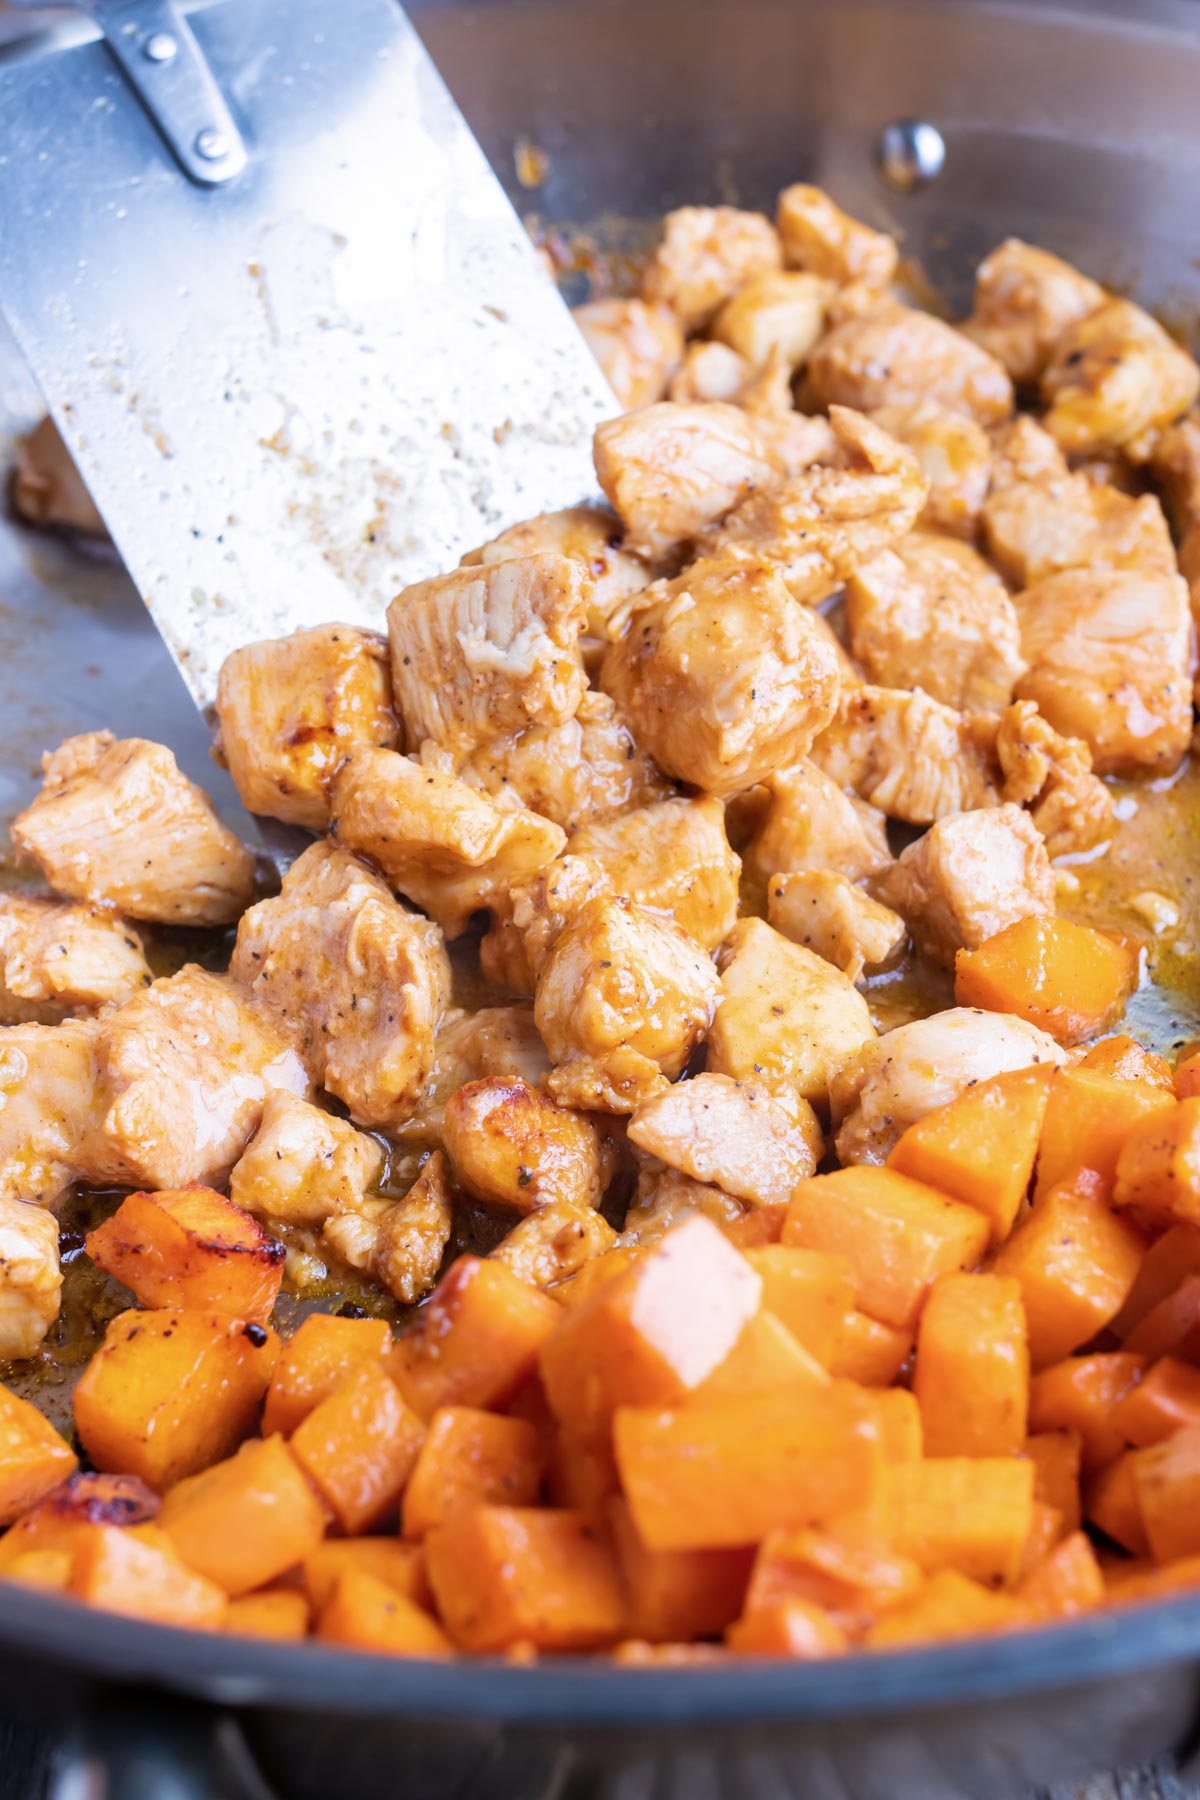 Chicken is added to the sweet potatoes in the skillet.